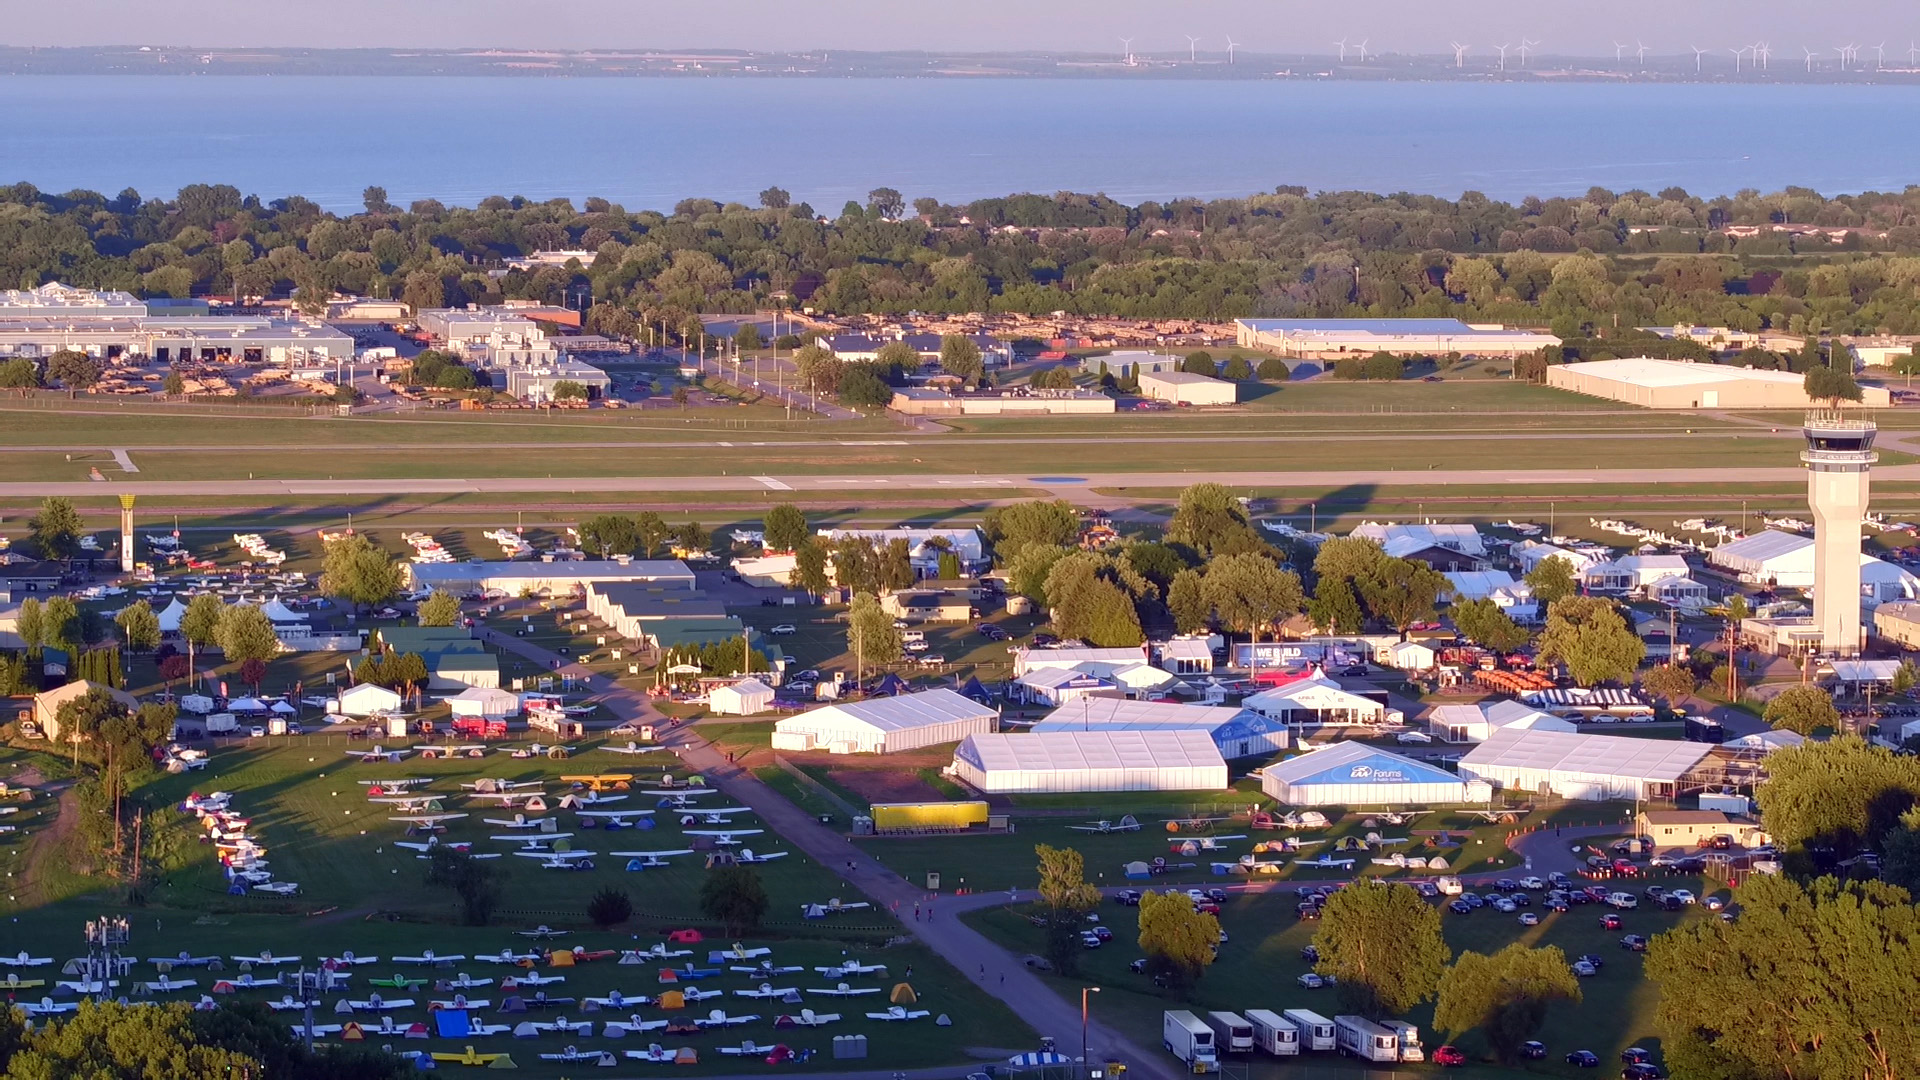 EAA AirVenture 2016 photographed by a DJI Inspire fitted with a 45mm lens and flown during RC hours supervised by the Academy of Model Aeronautics at Pioneer Airport. Jim Moore photo.